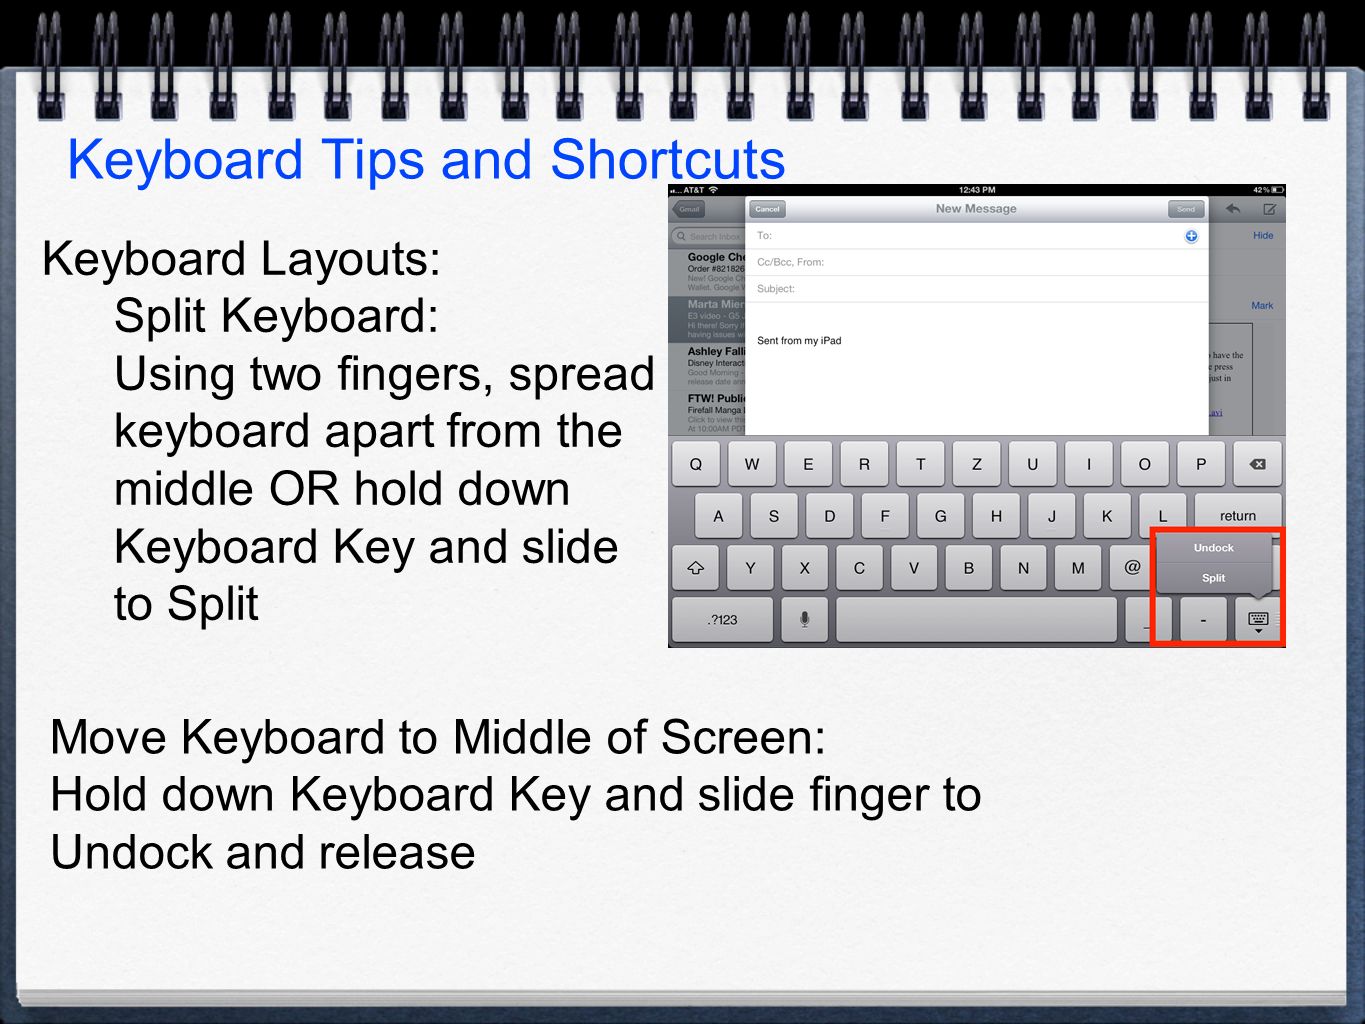 Keyboard Tips and Shortcuts Keyboard Layouts: Split Keyboard: Using two fingers, spread keyboard apart from the middle OR hold down Keyboard Key and slide to Split Move Keyboard to Middle of Screen: Hold down Keyboard Key and slide finger to Undock and release